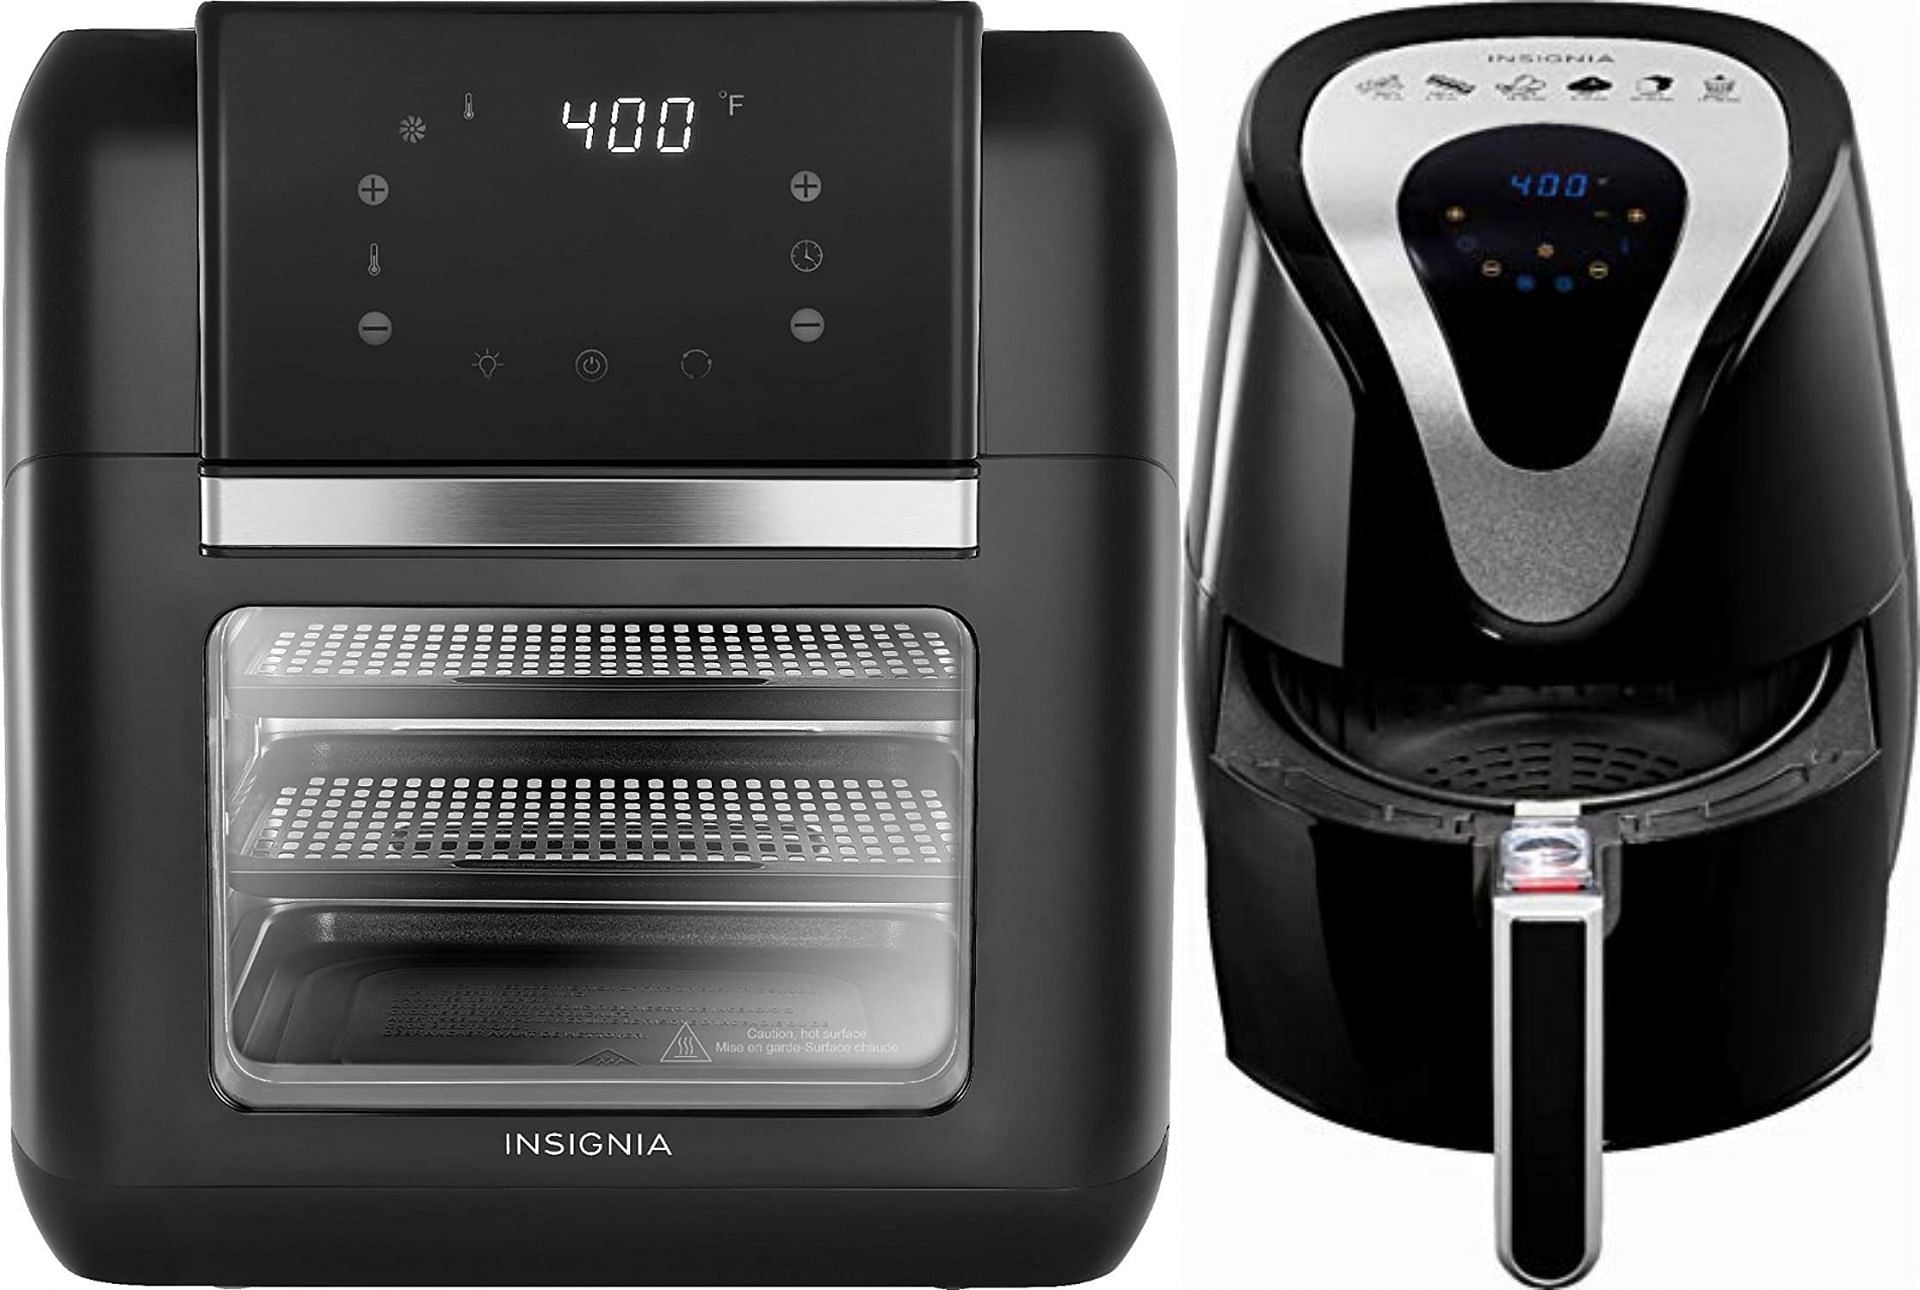 Insignia Air Fryers And Air Fryer Oven Recalled Due To Potential Fire Hazard